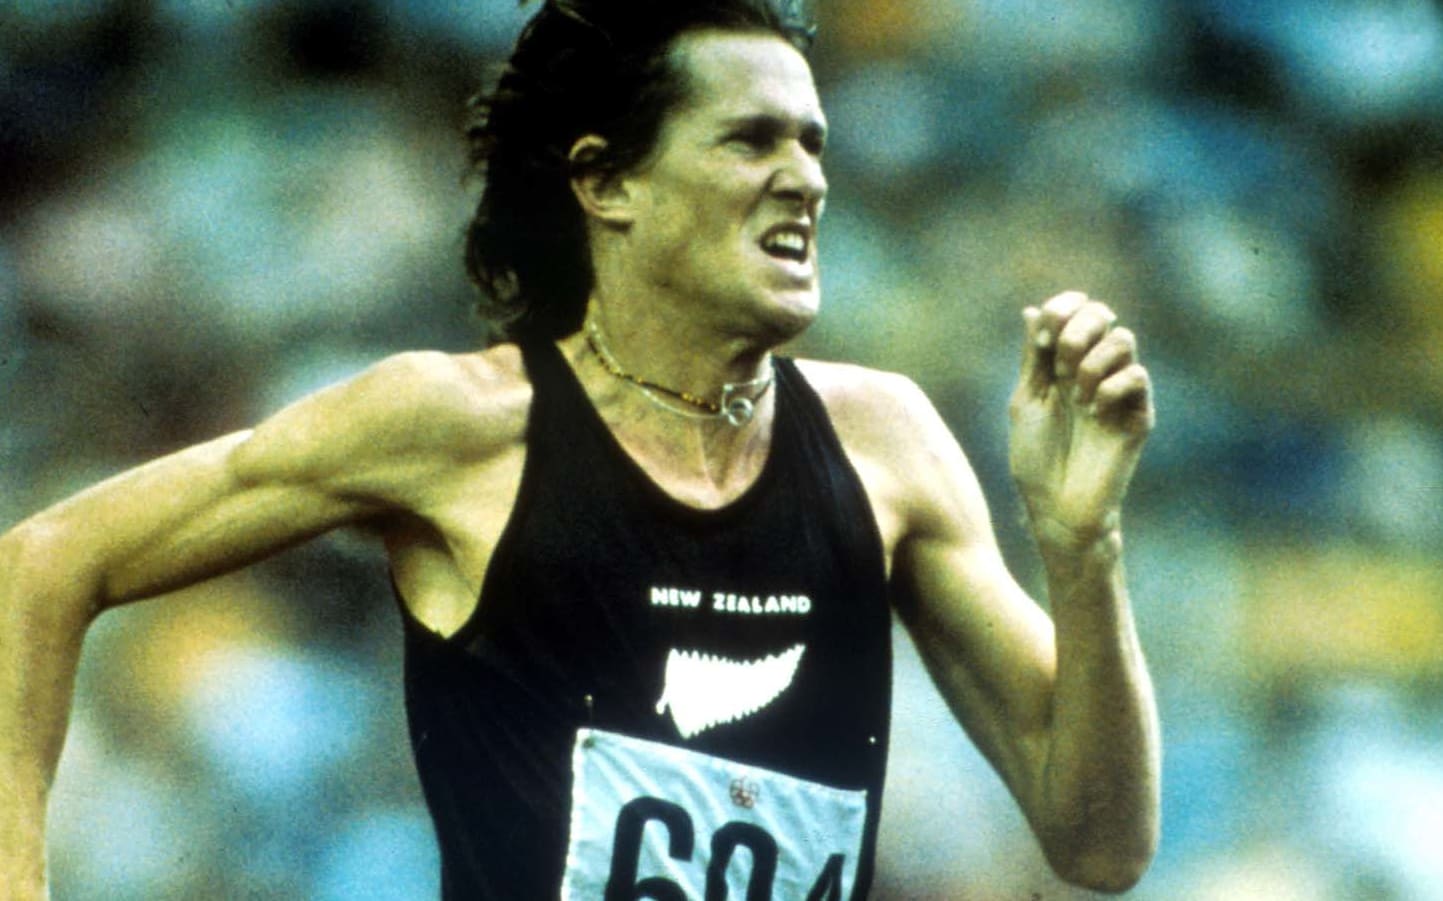 John Walker running the 1500m at the 1976 Montreal Olympics.